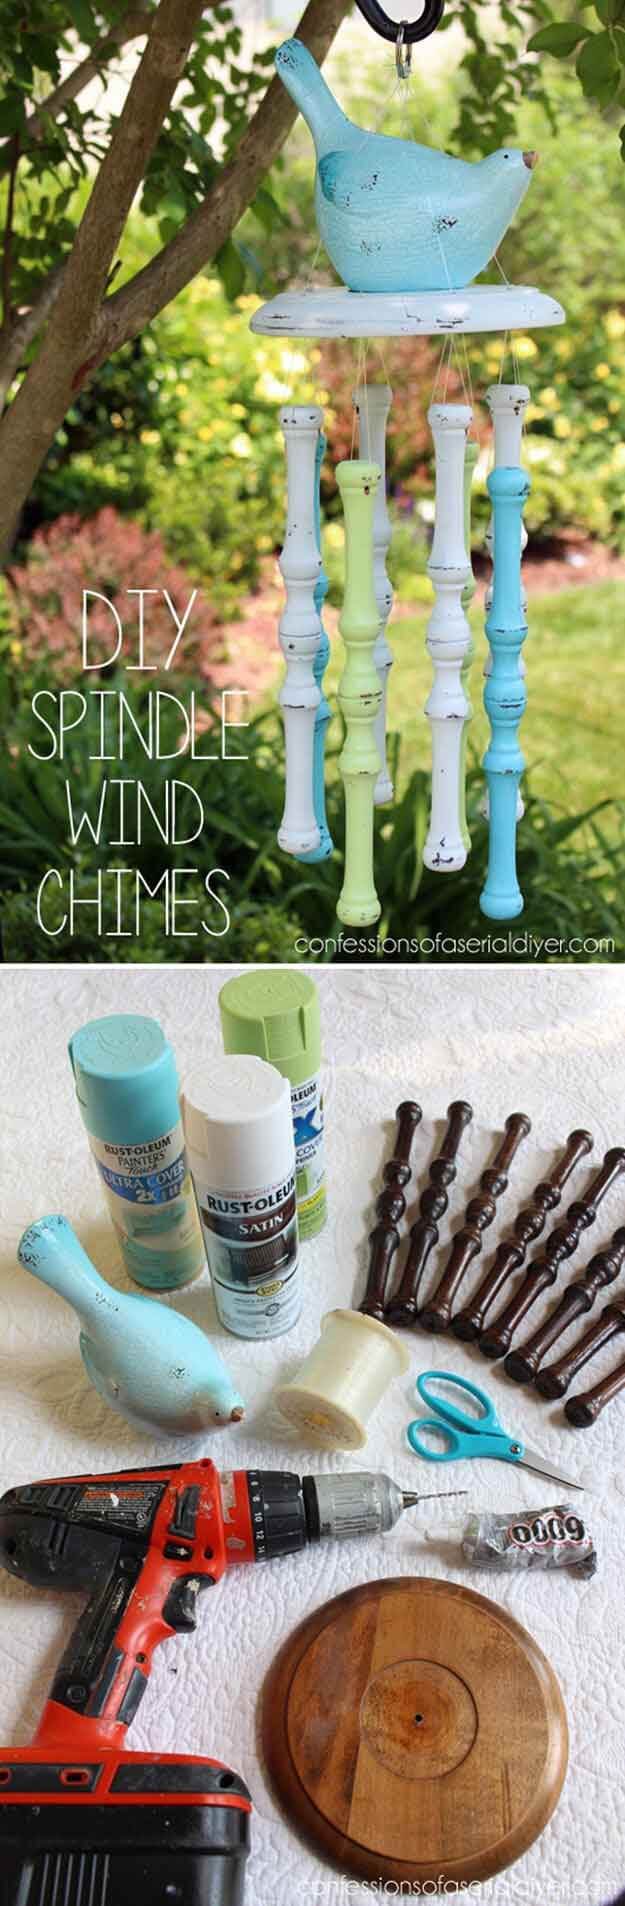 15 Cool Spindle Crafts You Didn't Expect